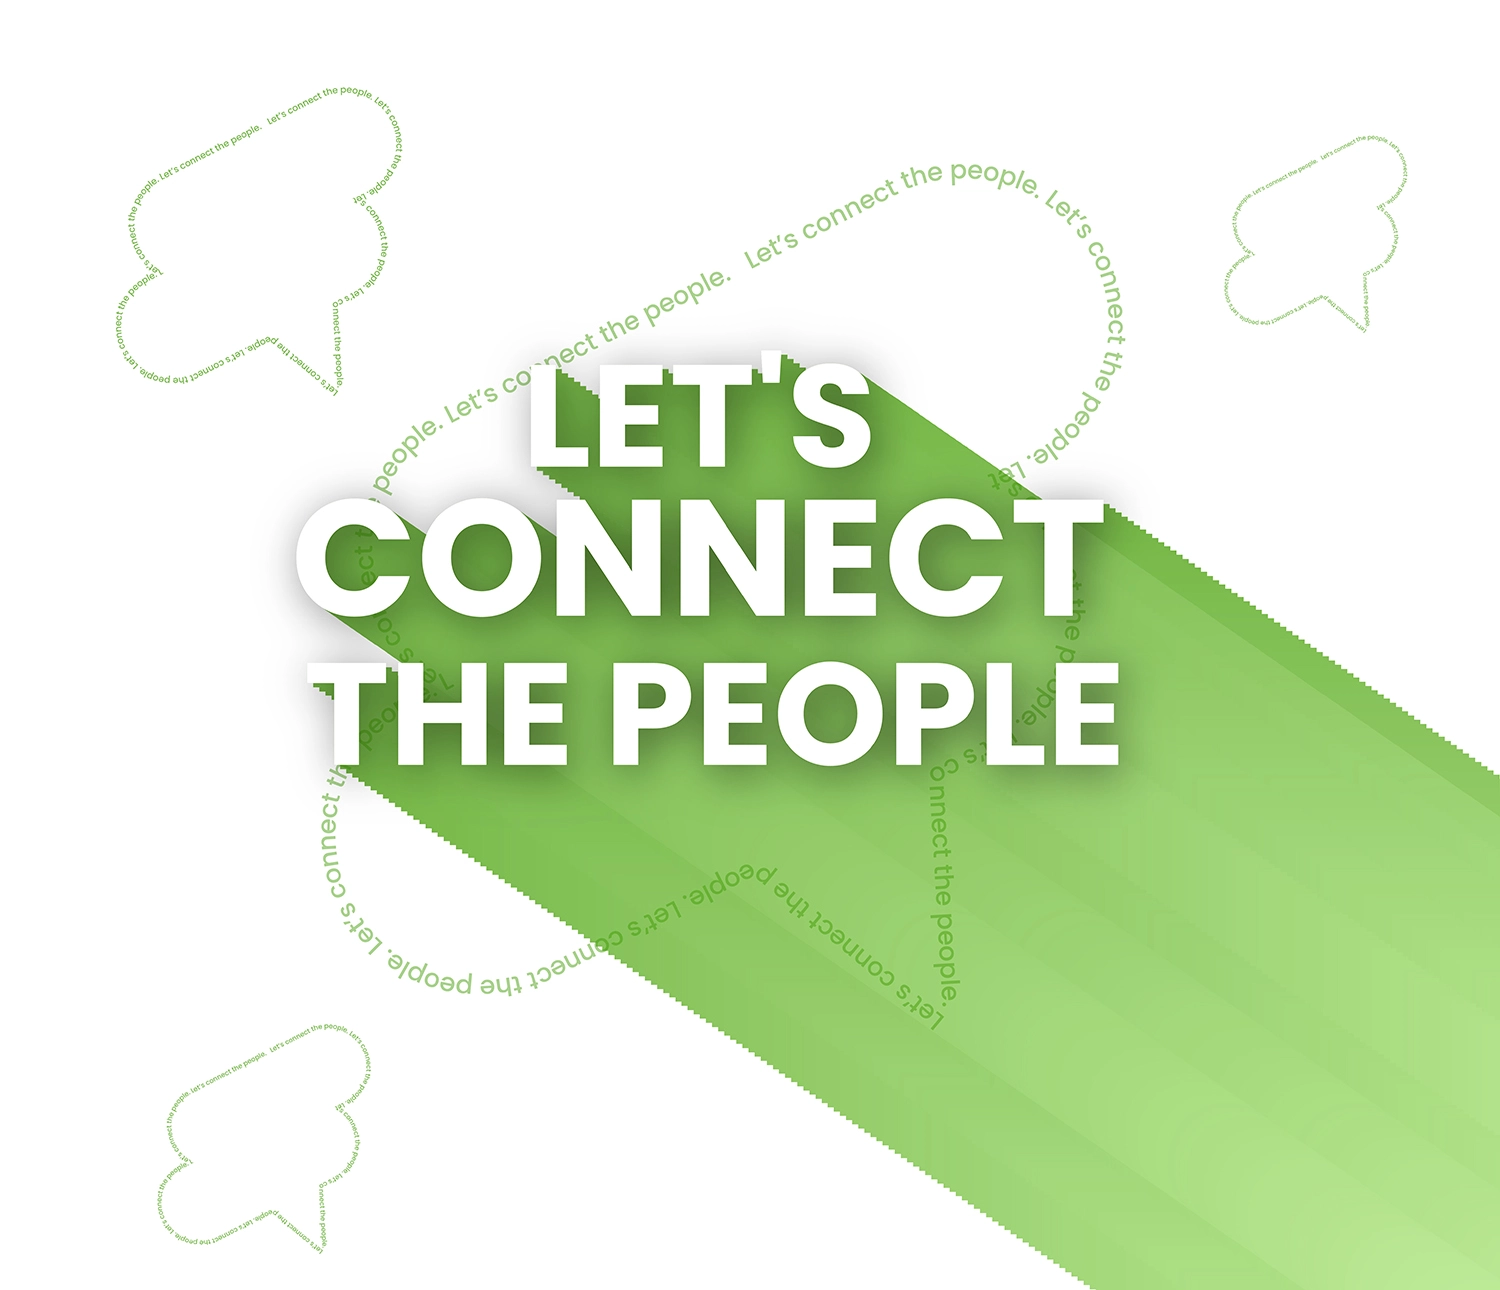 Let's Connect The People | MsgMee